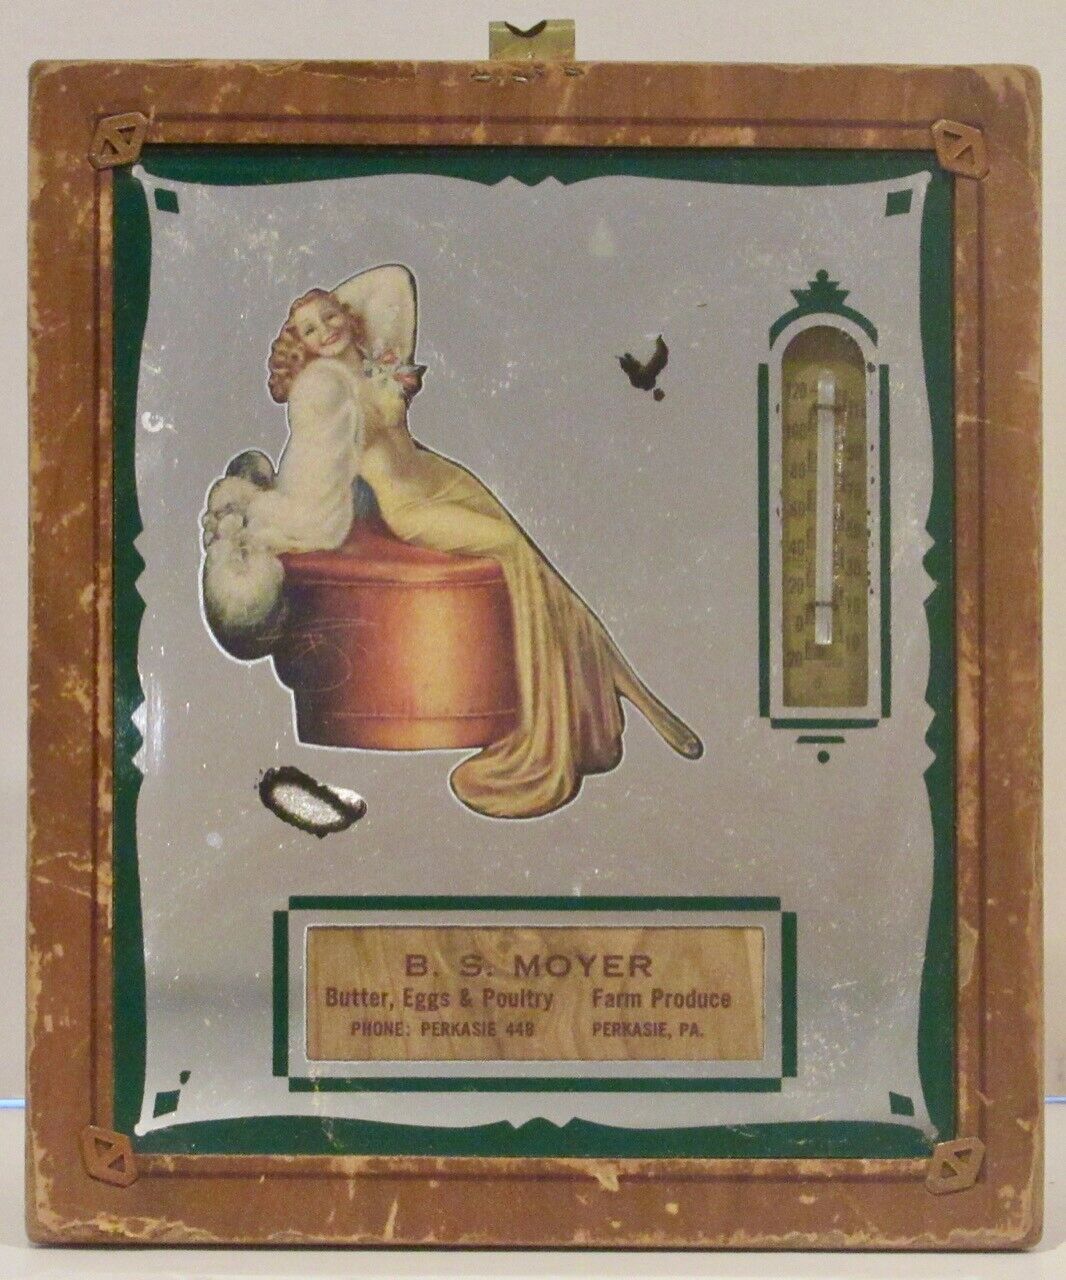 ADVERTISING MIRRORED THERMOMETER MOYER POULTRY PERKASIE PA 1930s, WOMAN IN GOWN